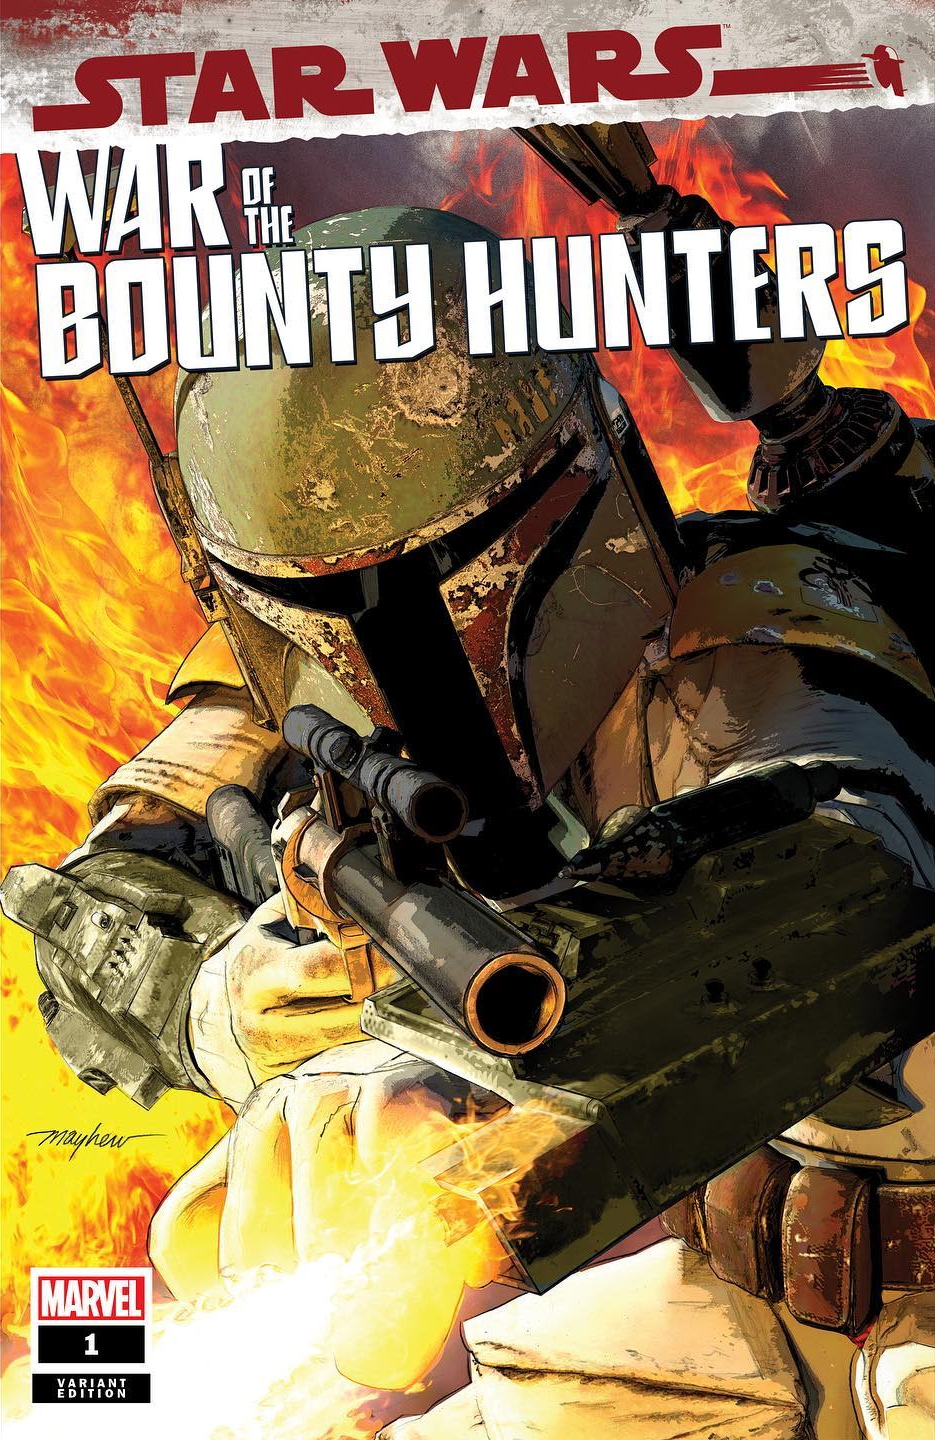 War of the Bounty Hunters #1 (Mike Mayhew Studio Variant Cover) (02.06.2021)